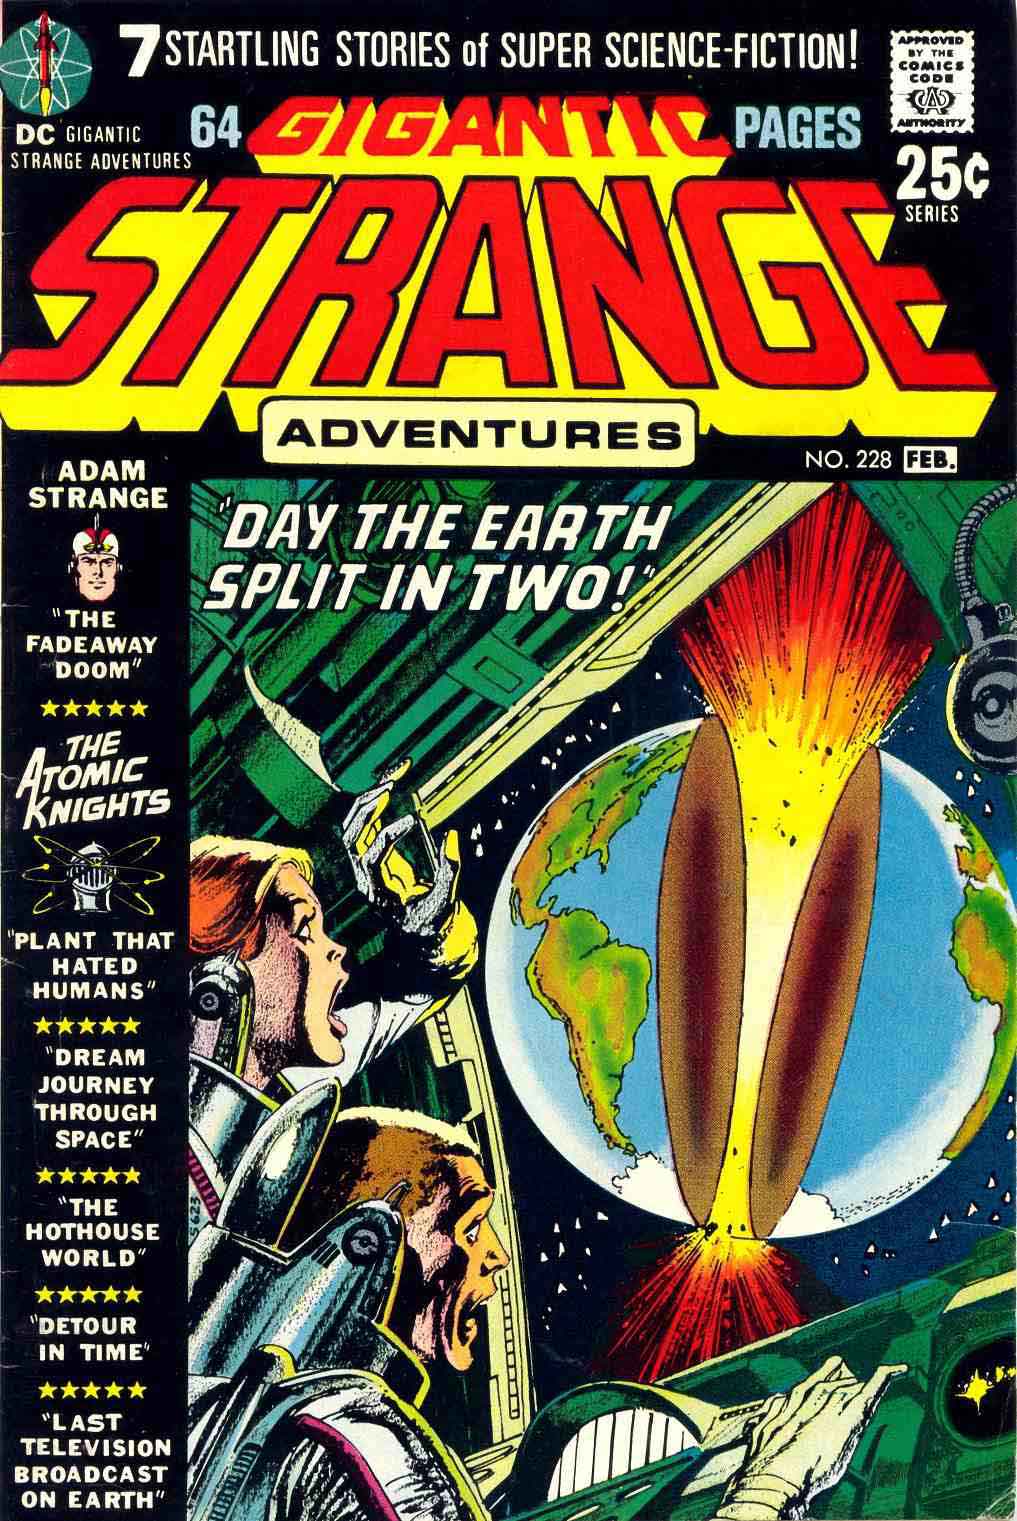 Strange Adventures v1 #228 dc comic book cover art by Neal Adams